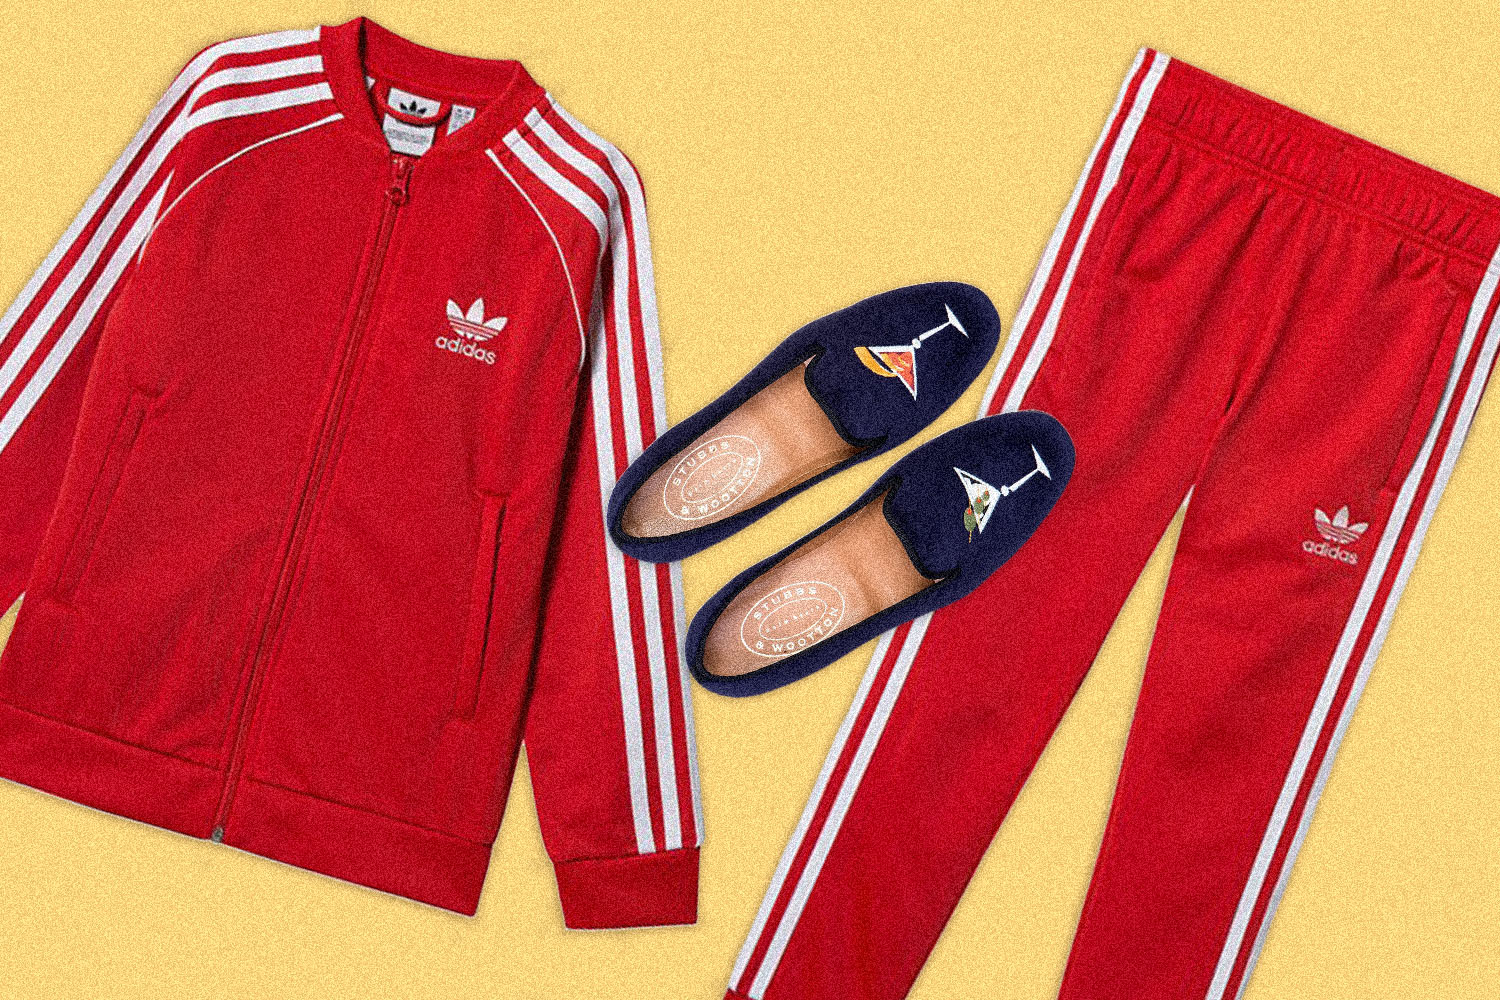 Why the Adidas Tracksuit Is the Perfect 